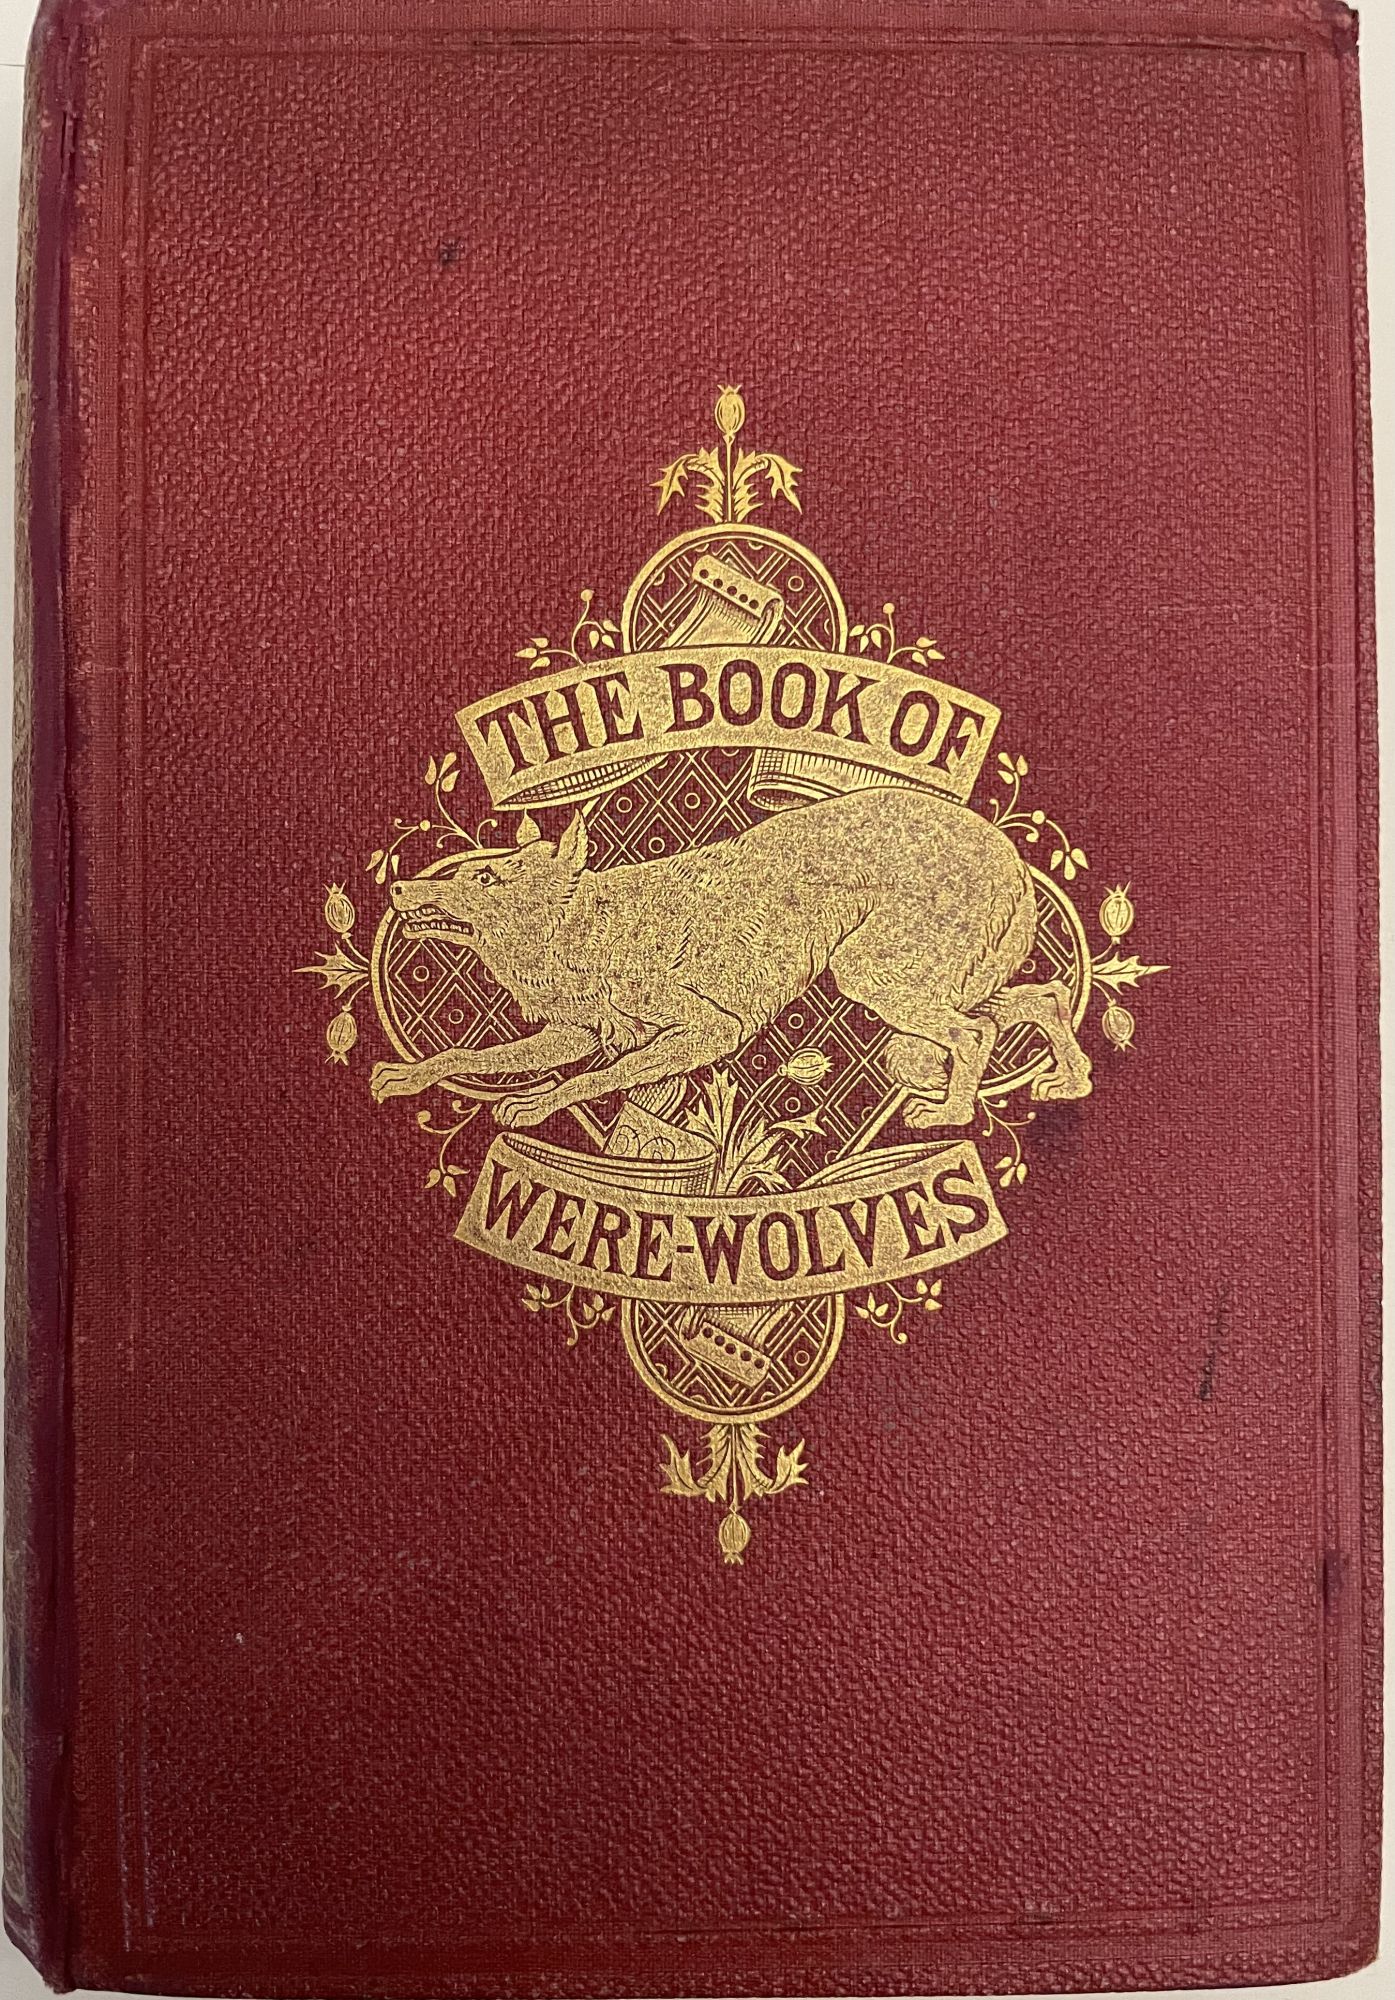 von　The　Were-wolves:　Superstition　a　Sabine:　Booksellers,　Edition.　Fine　Being　An　First　Book　Mentis,　ABAA/ILAB　Baring-Gould,　of　Terrible　(1865)　of　Lux　Account　Hardcover